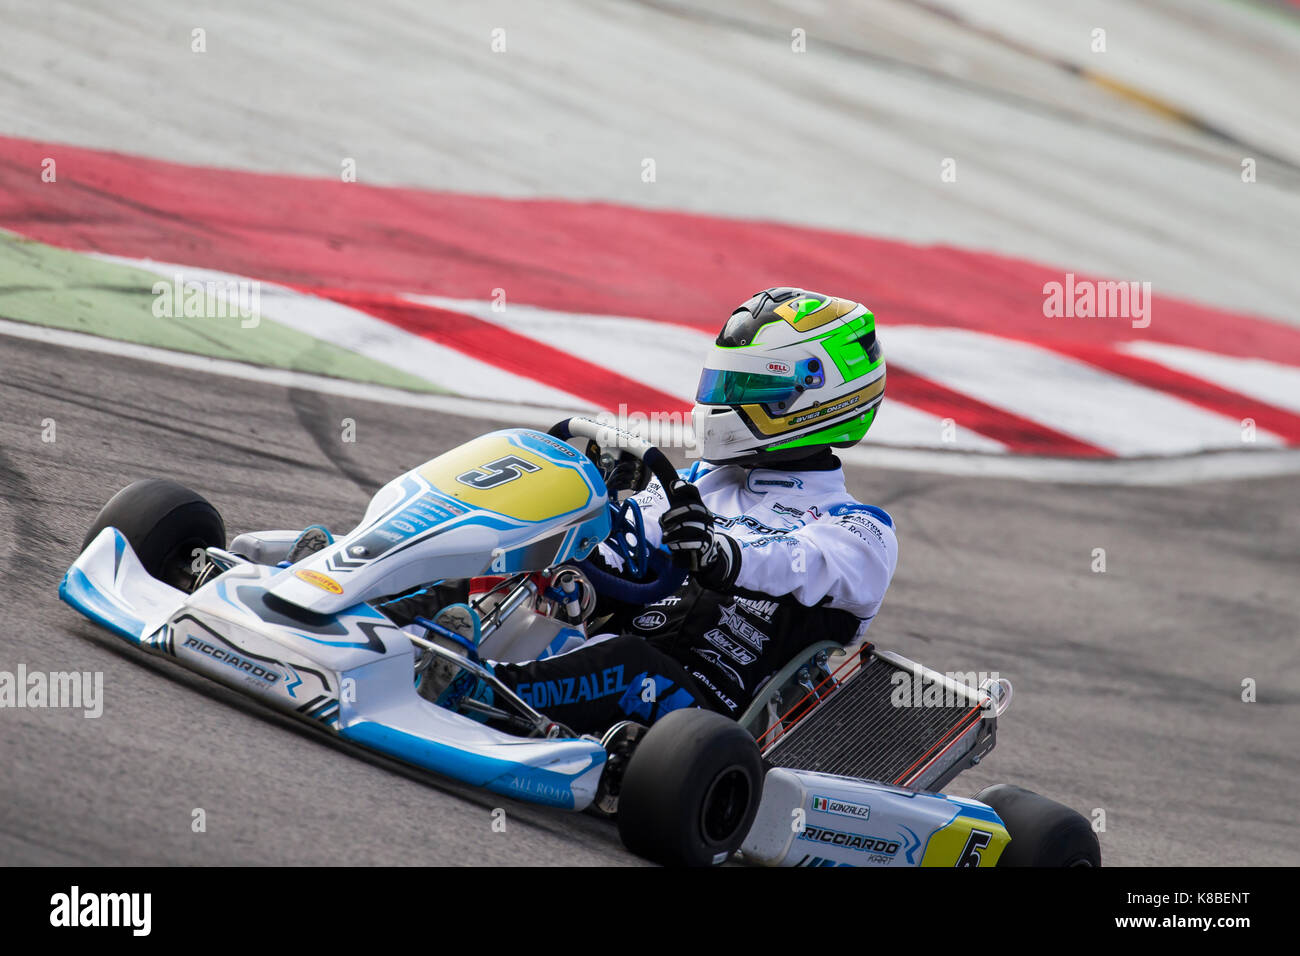 Adria, Rovigo (Italy) - October 2, 2016: Ricciardo Kart Racing Team, driven  by Gonzalez Javier during the race in the Wsk Final Cup in Adria Karting  Stock Photo - Alamy